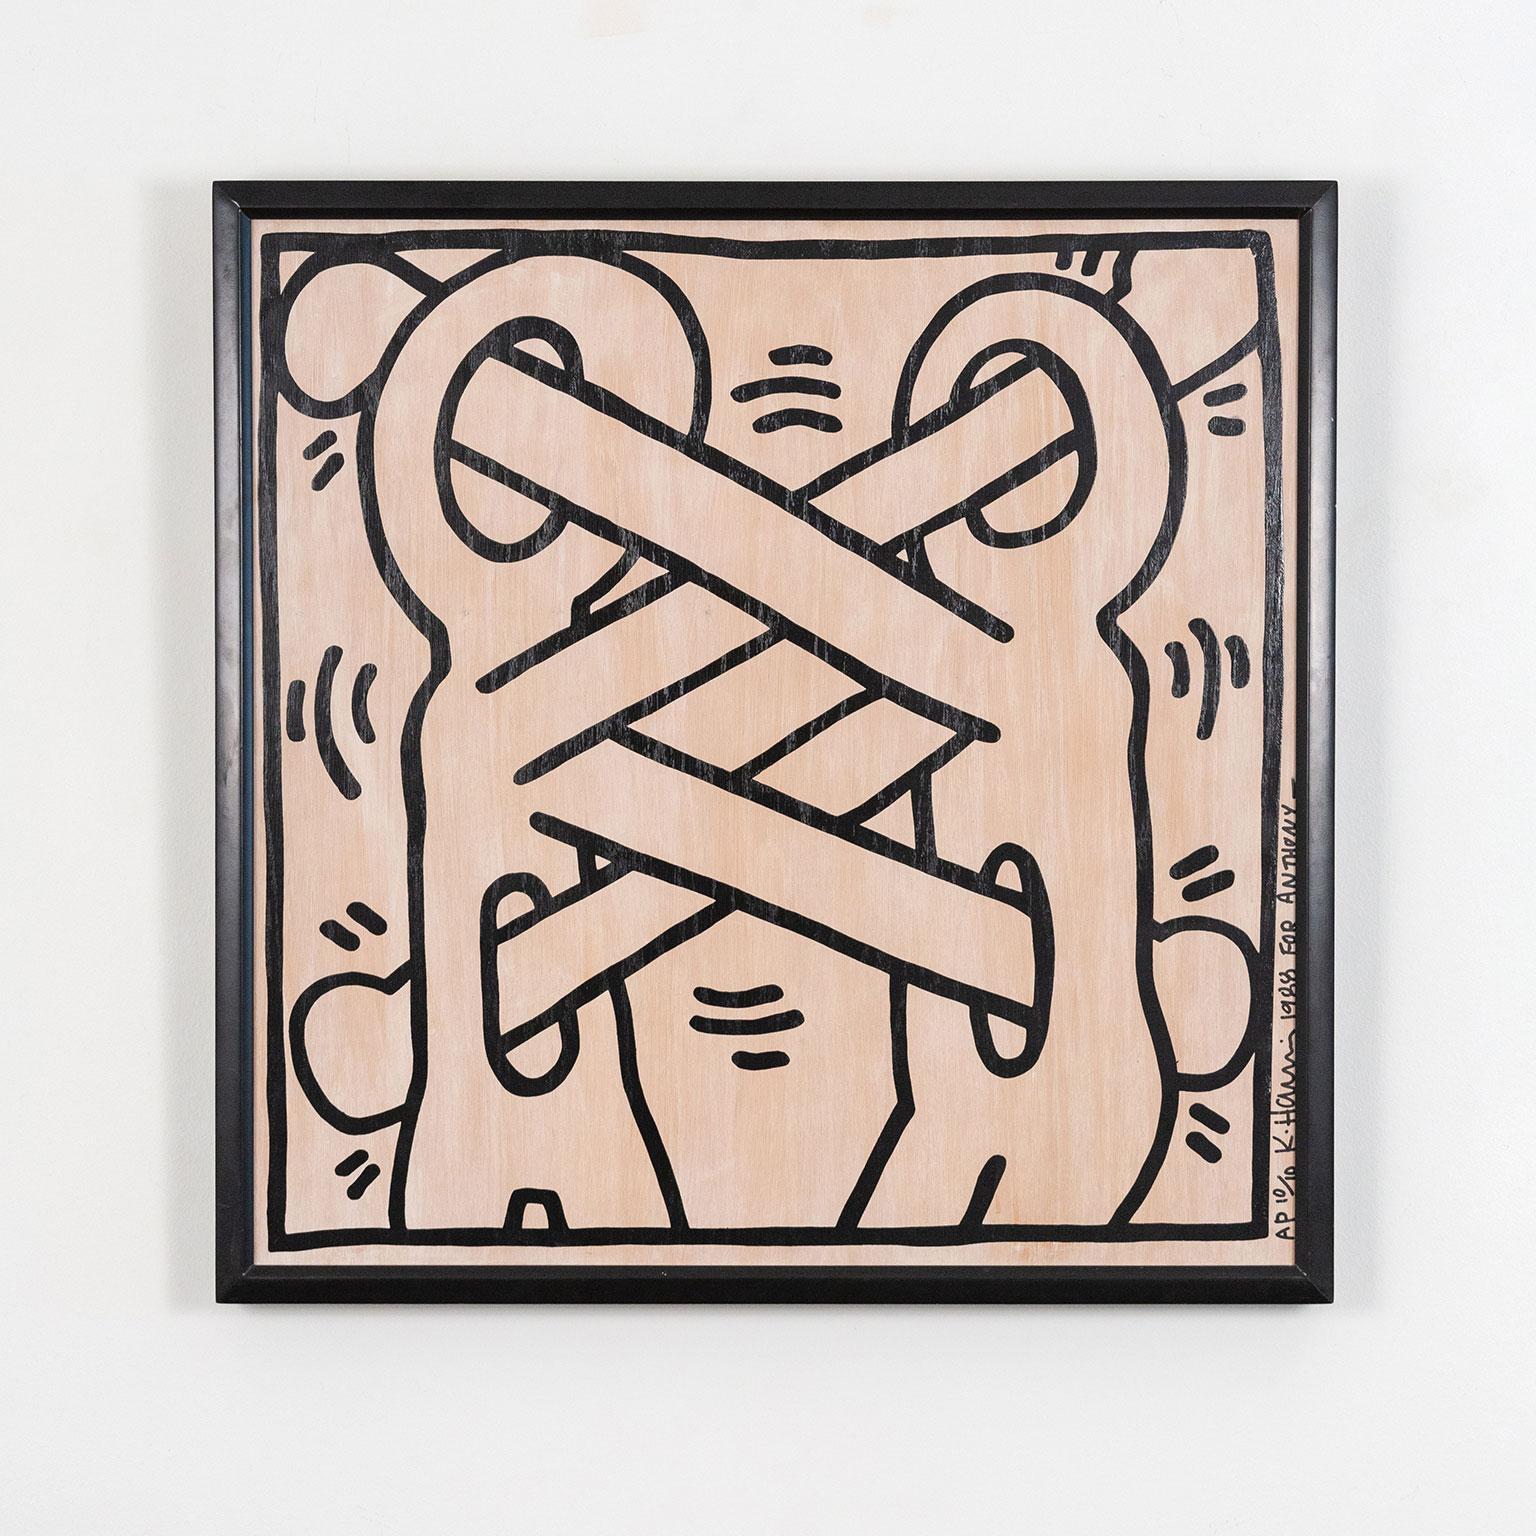 Art Attack on AIDS - Print by Keith Haring